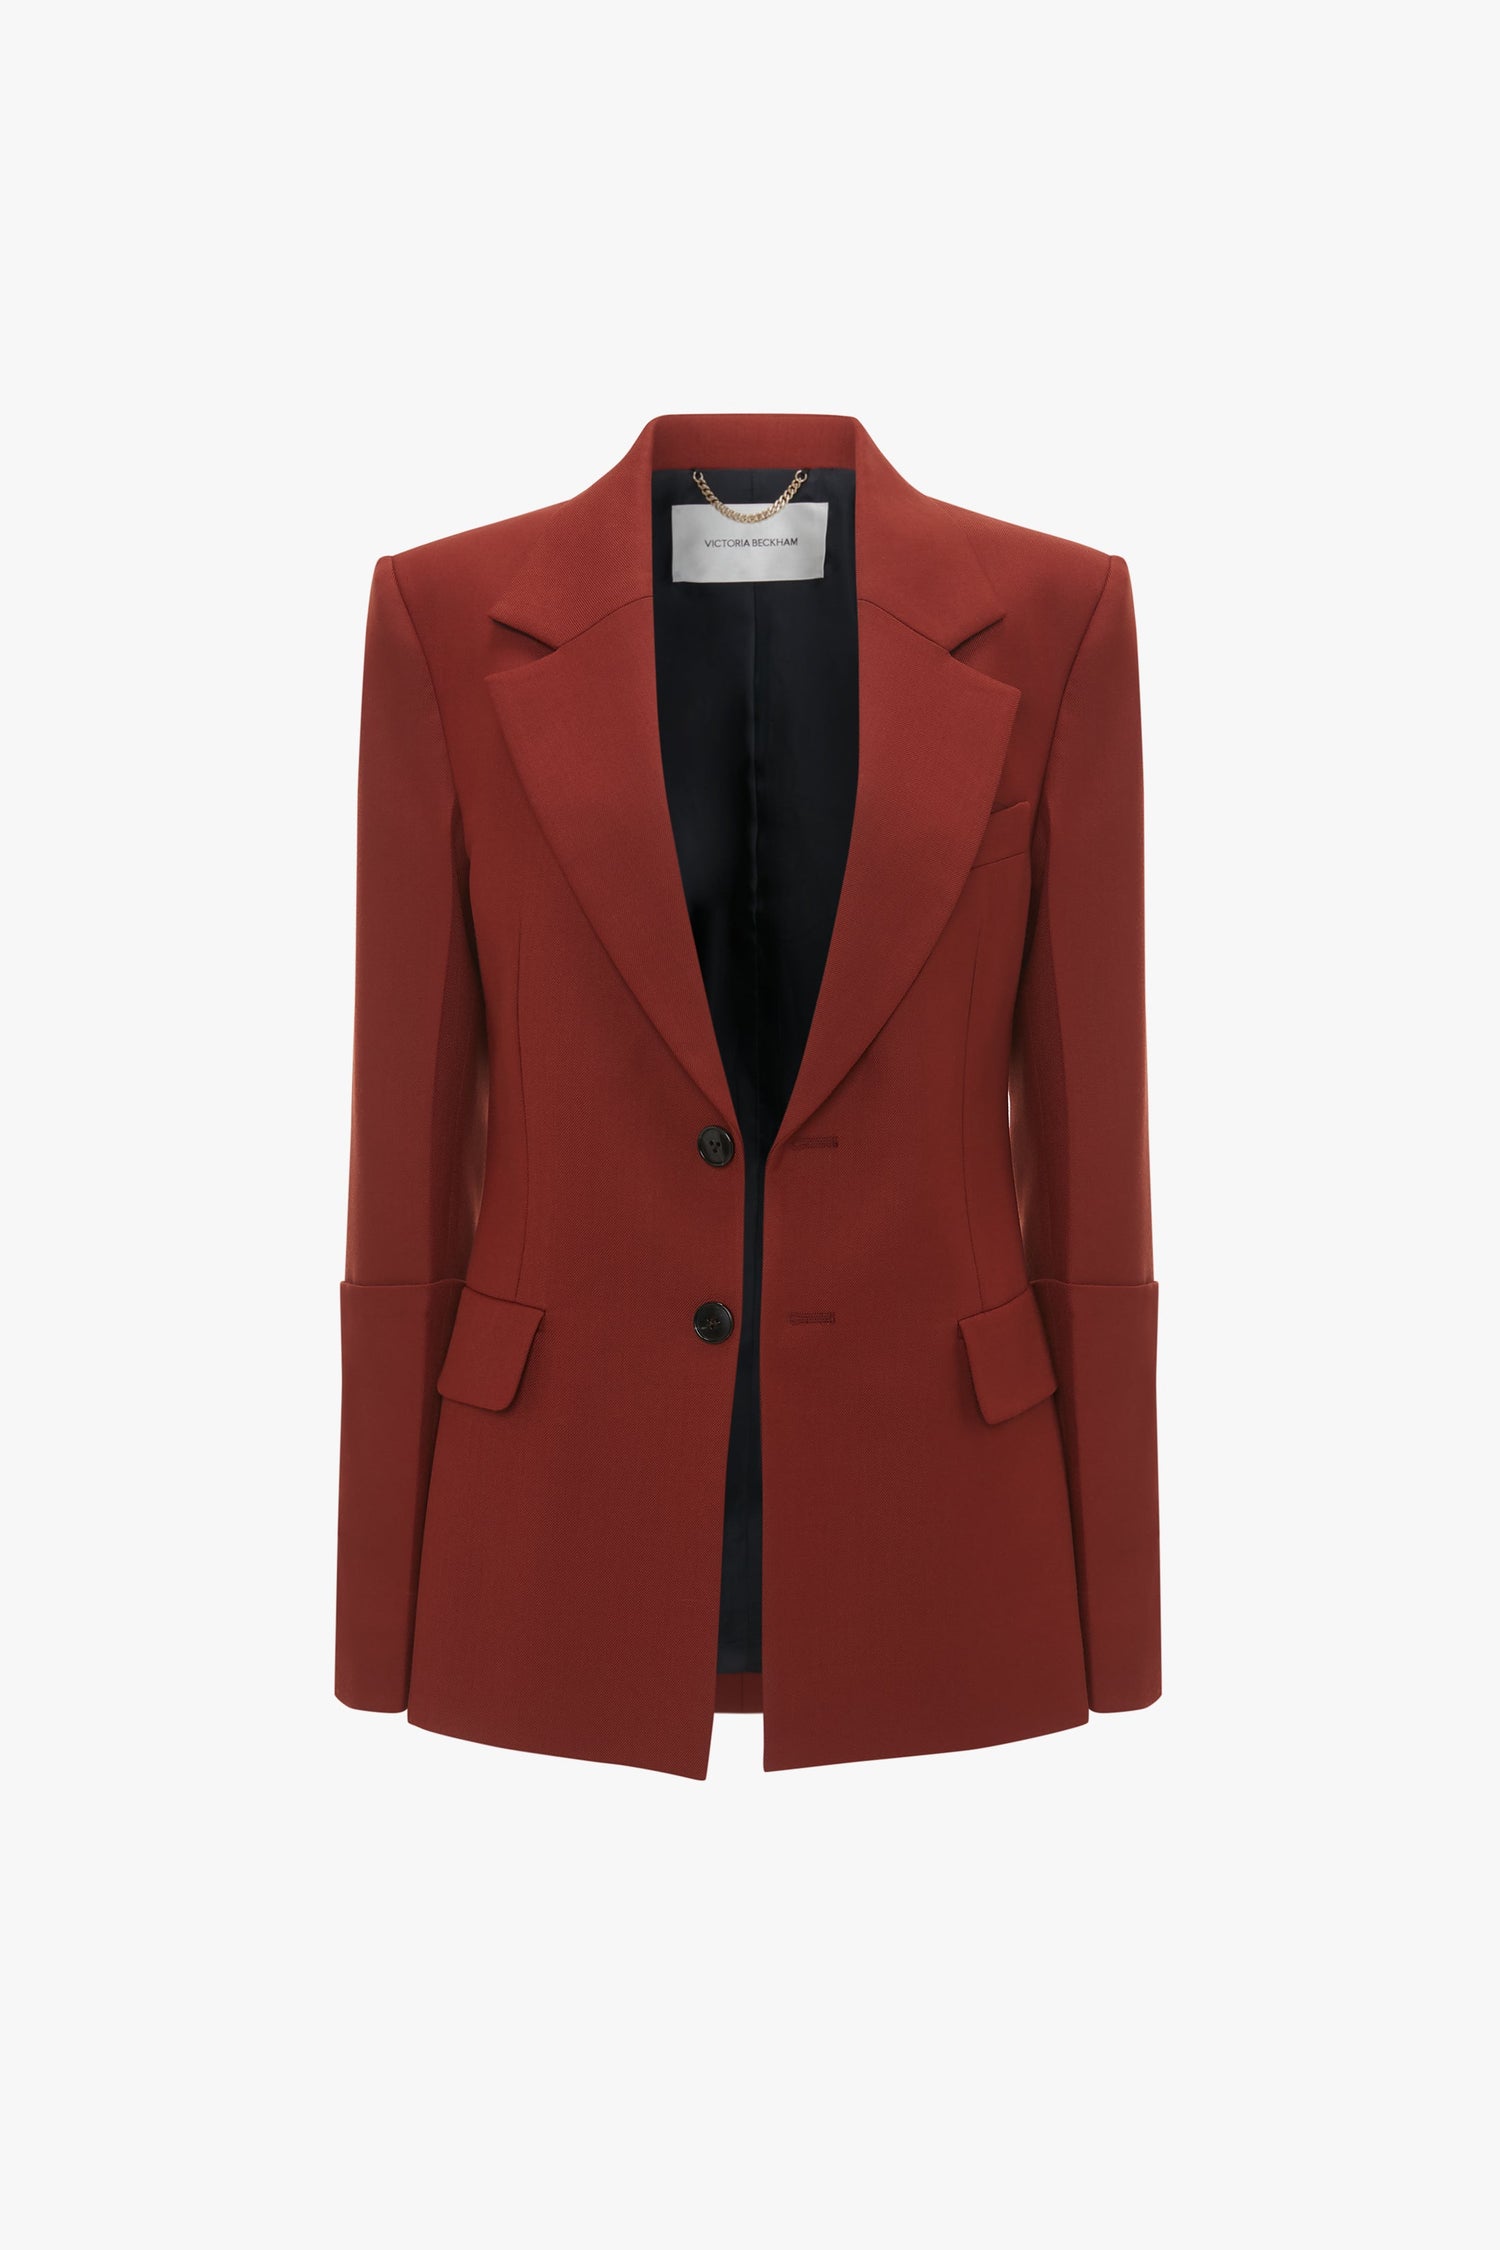 A single-breasted, tailored Victoria Beckham Sleeve Detail Patch Pocket Jacket In Russet crafted from recycled wool, featuring contemporary detailing with a notch lapel, two front pockets with flaps, and buttoned cuffs.